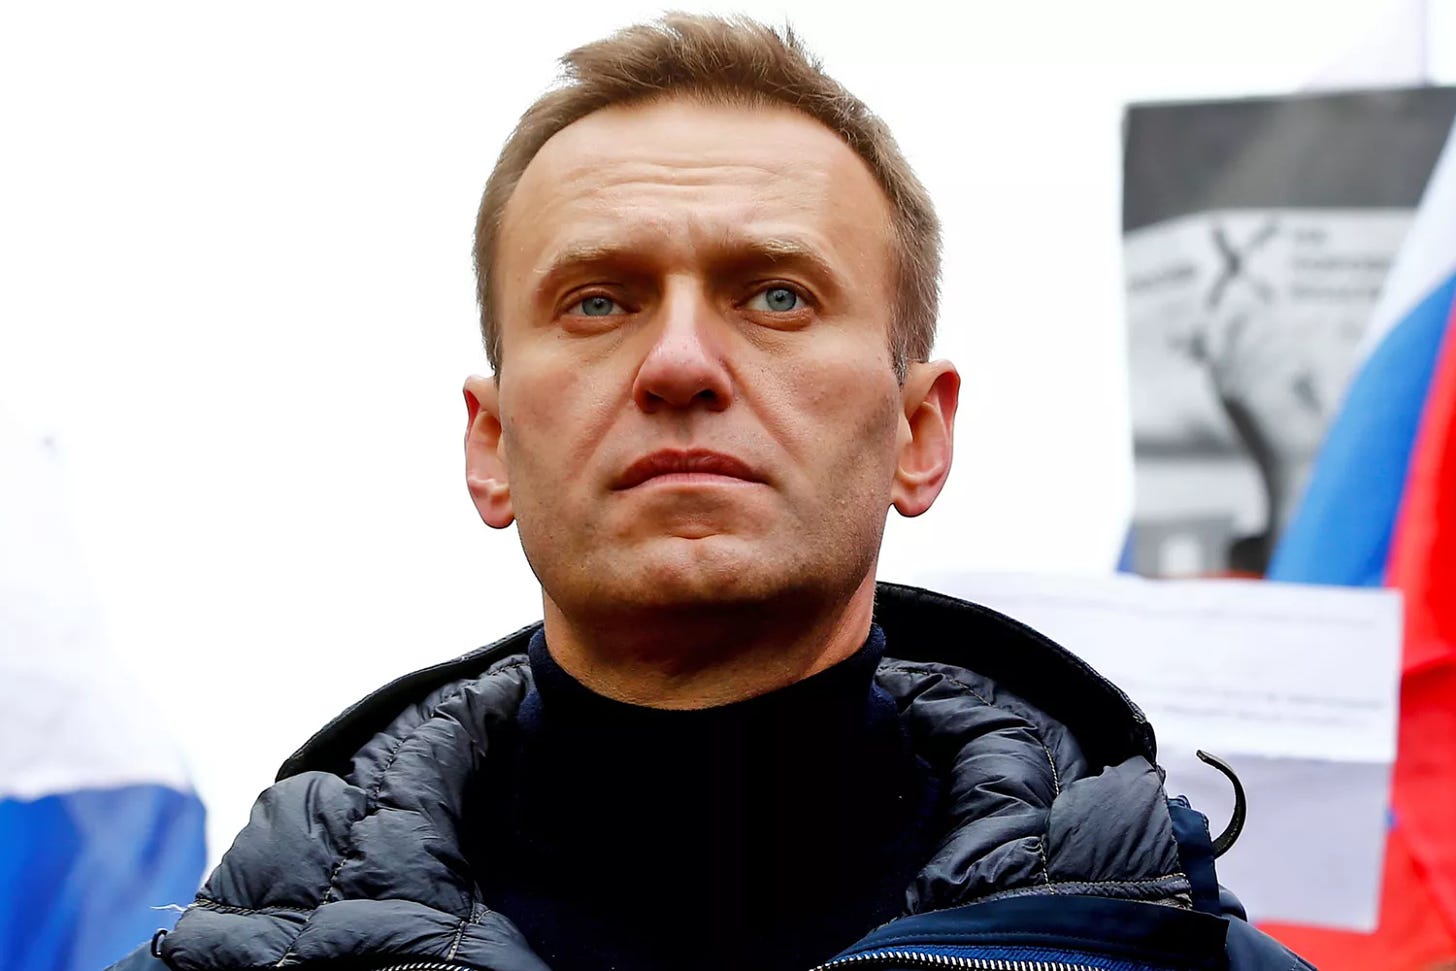 Russian opposition leader Alexei Navalny takes part in a march at Strastnoy Boulevard in memory of Russian politician and opposition leader Boris Nemtsov on his 4th death anniversary in Moscow, Russia on February 24, 2019